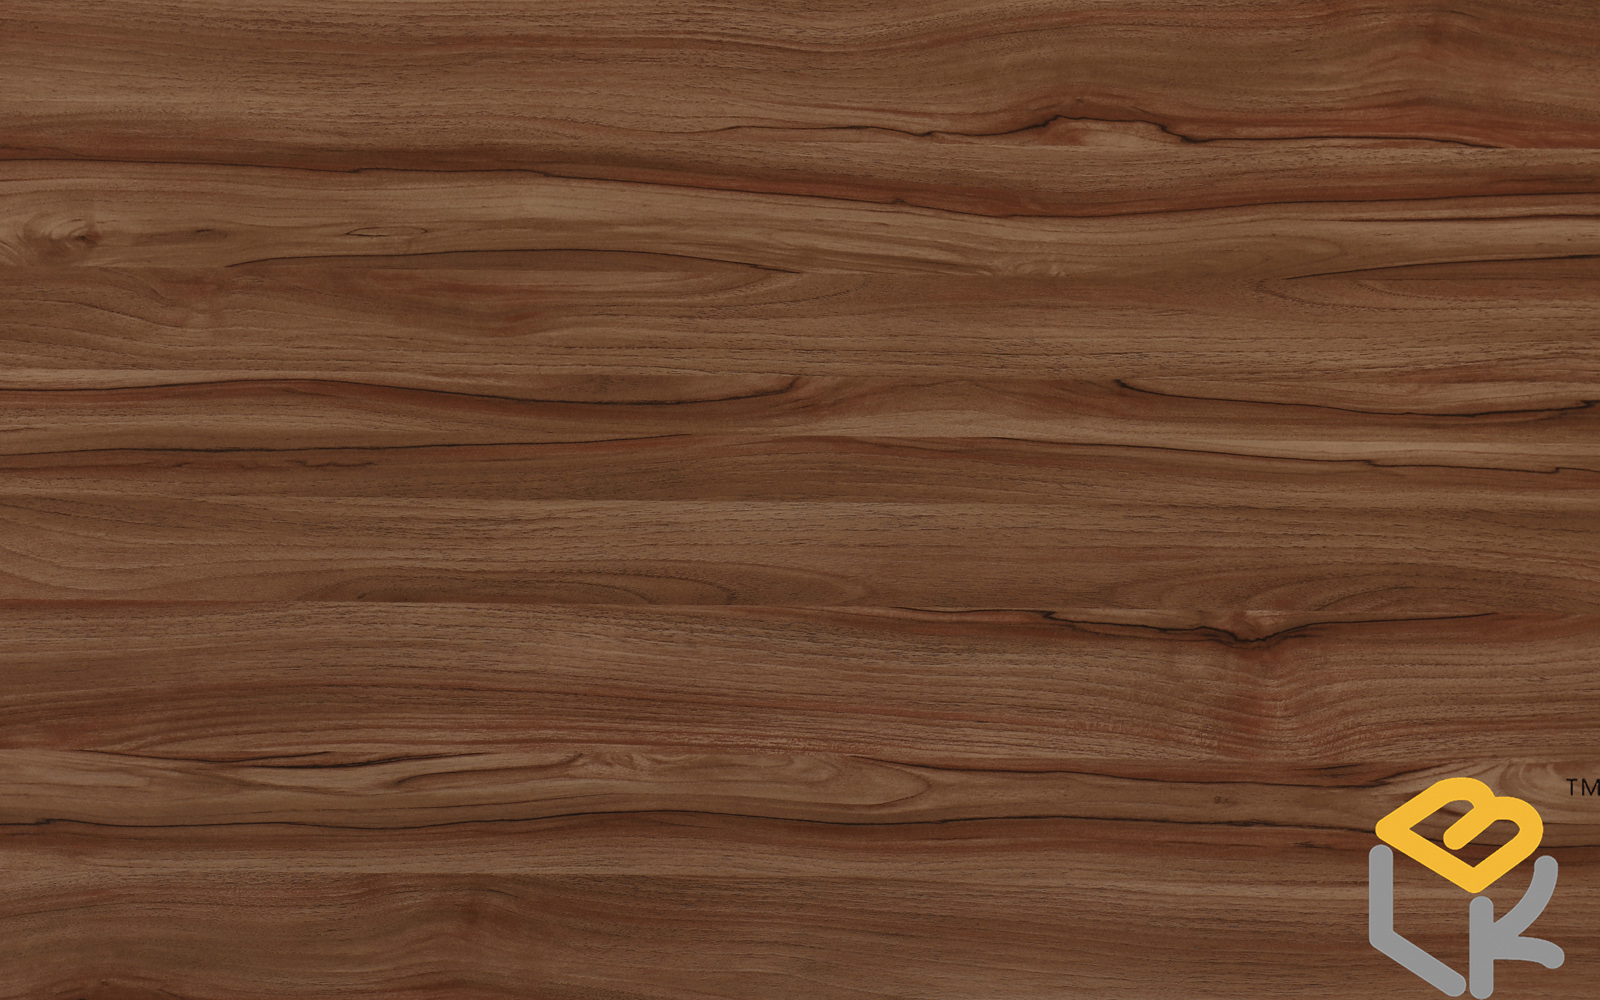 China woodgrain melamine faced particleboard from BLK